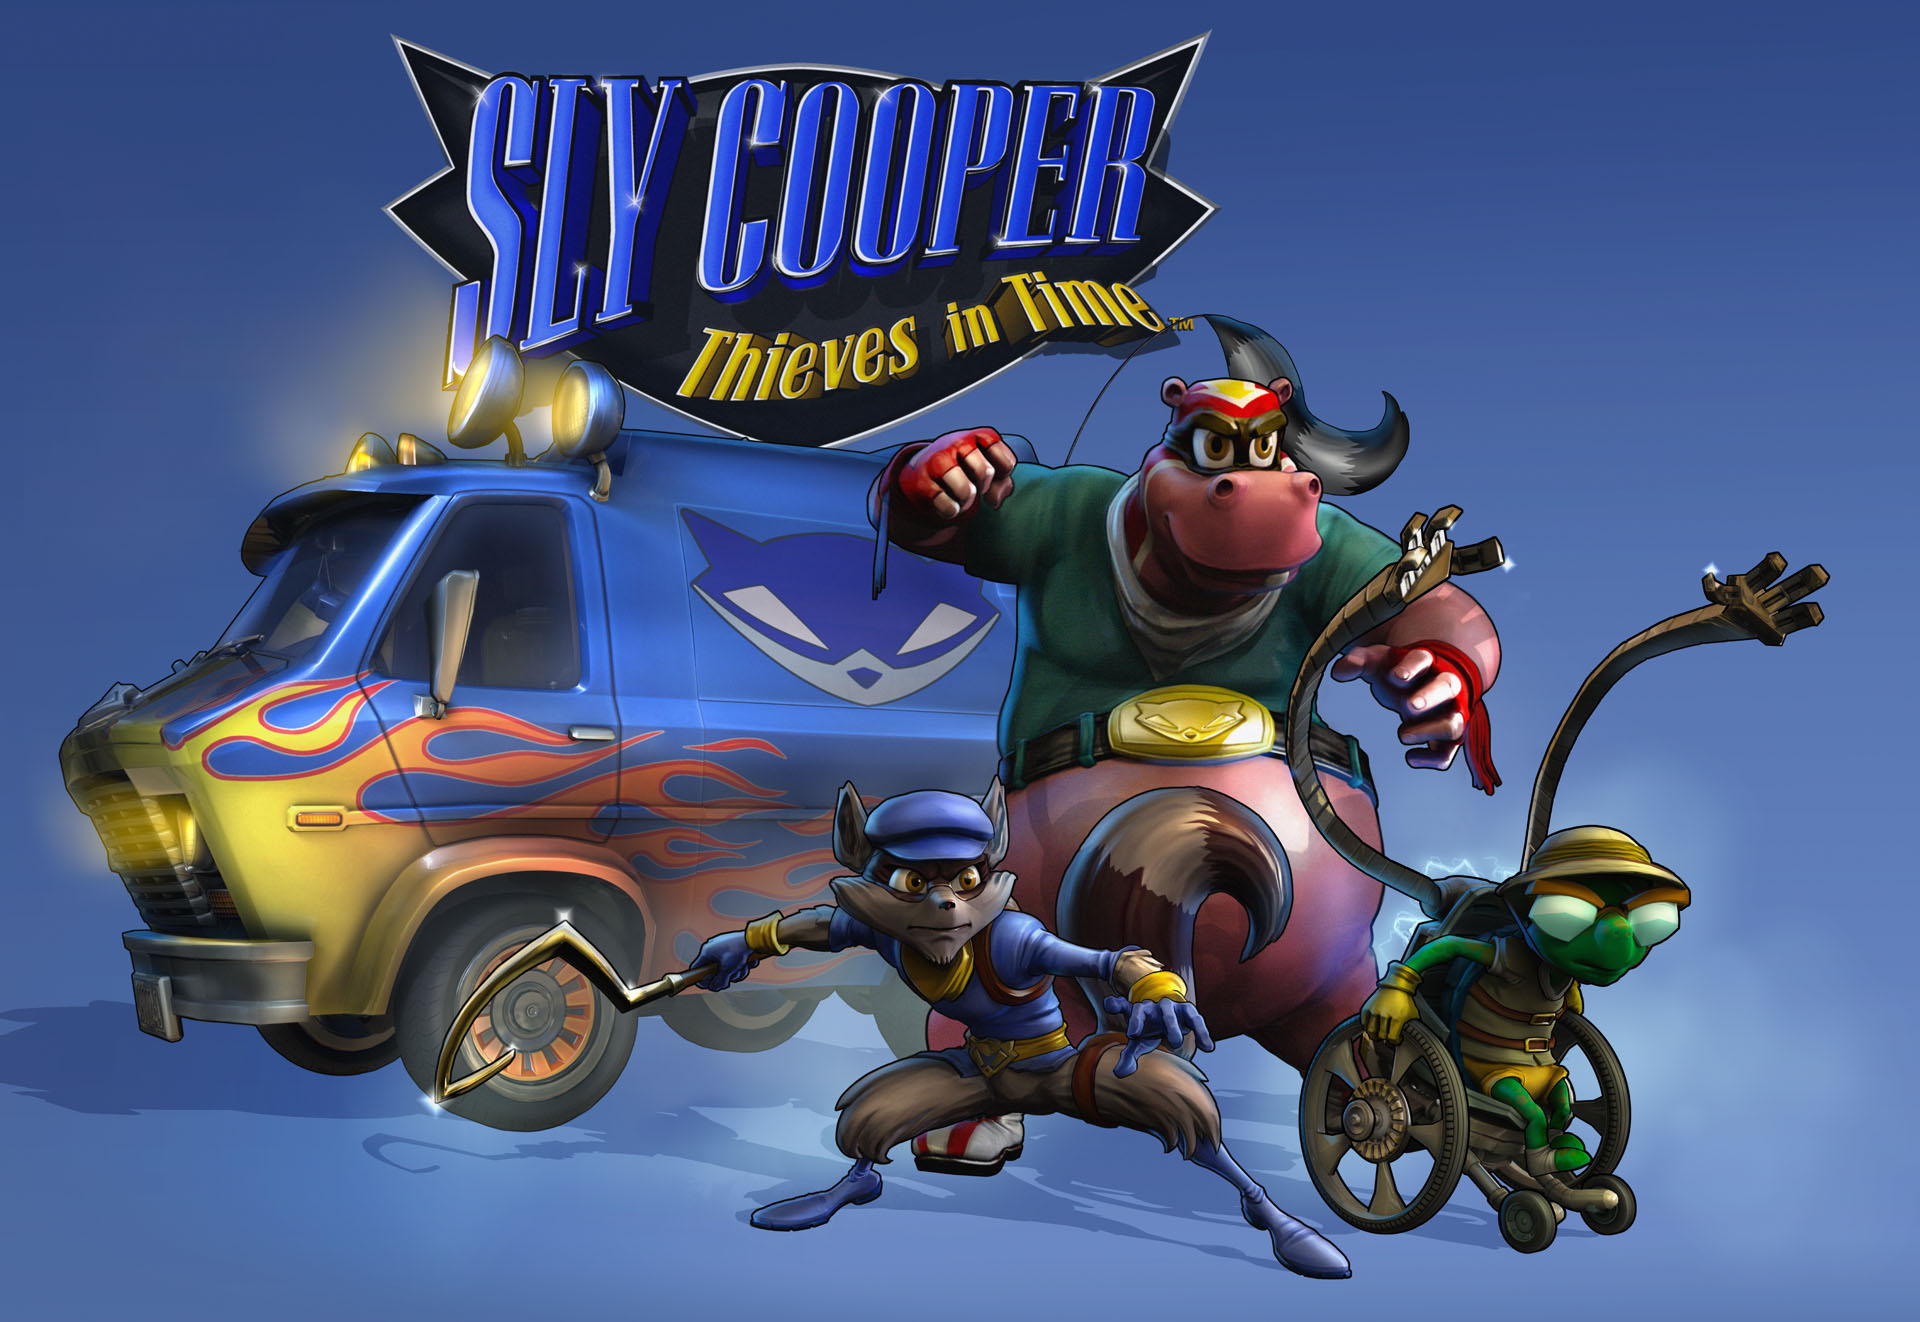 Sly Cooper: Thieves in PS Vita Preview